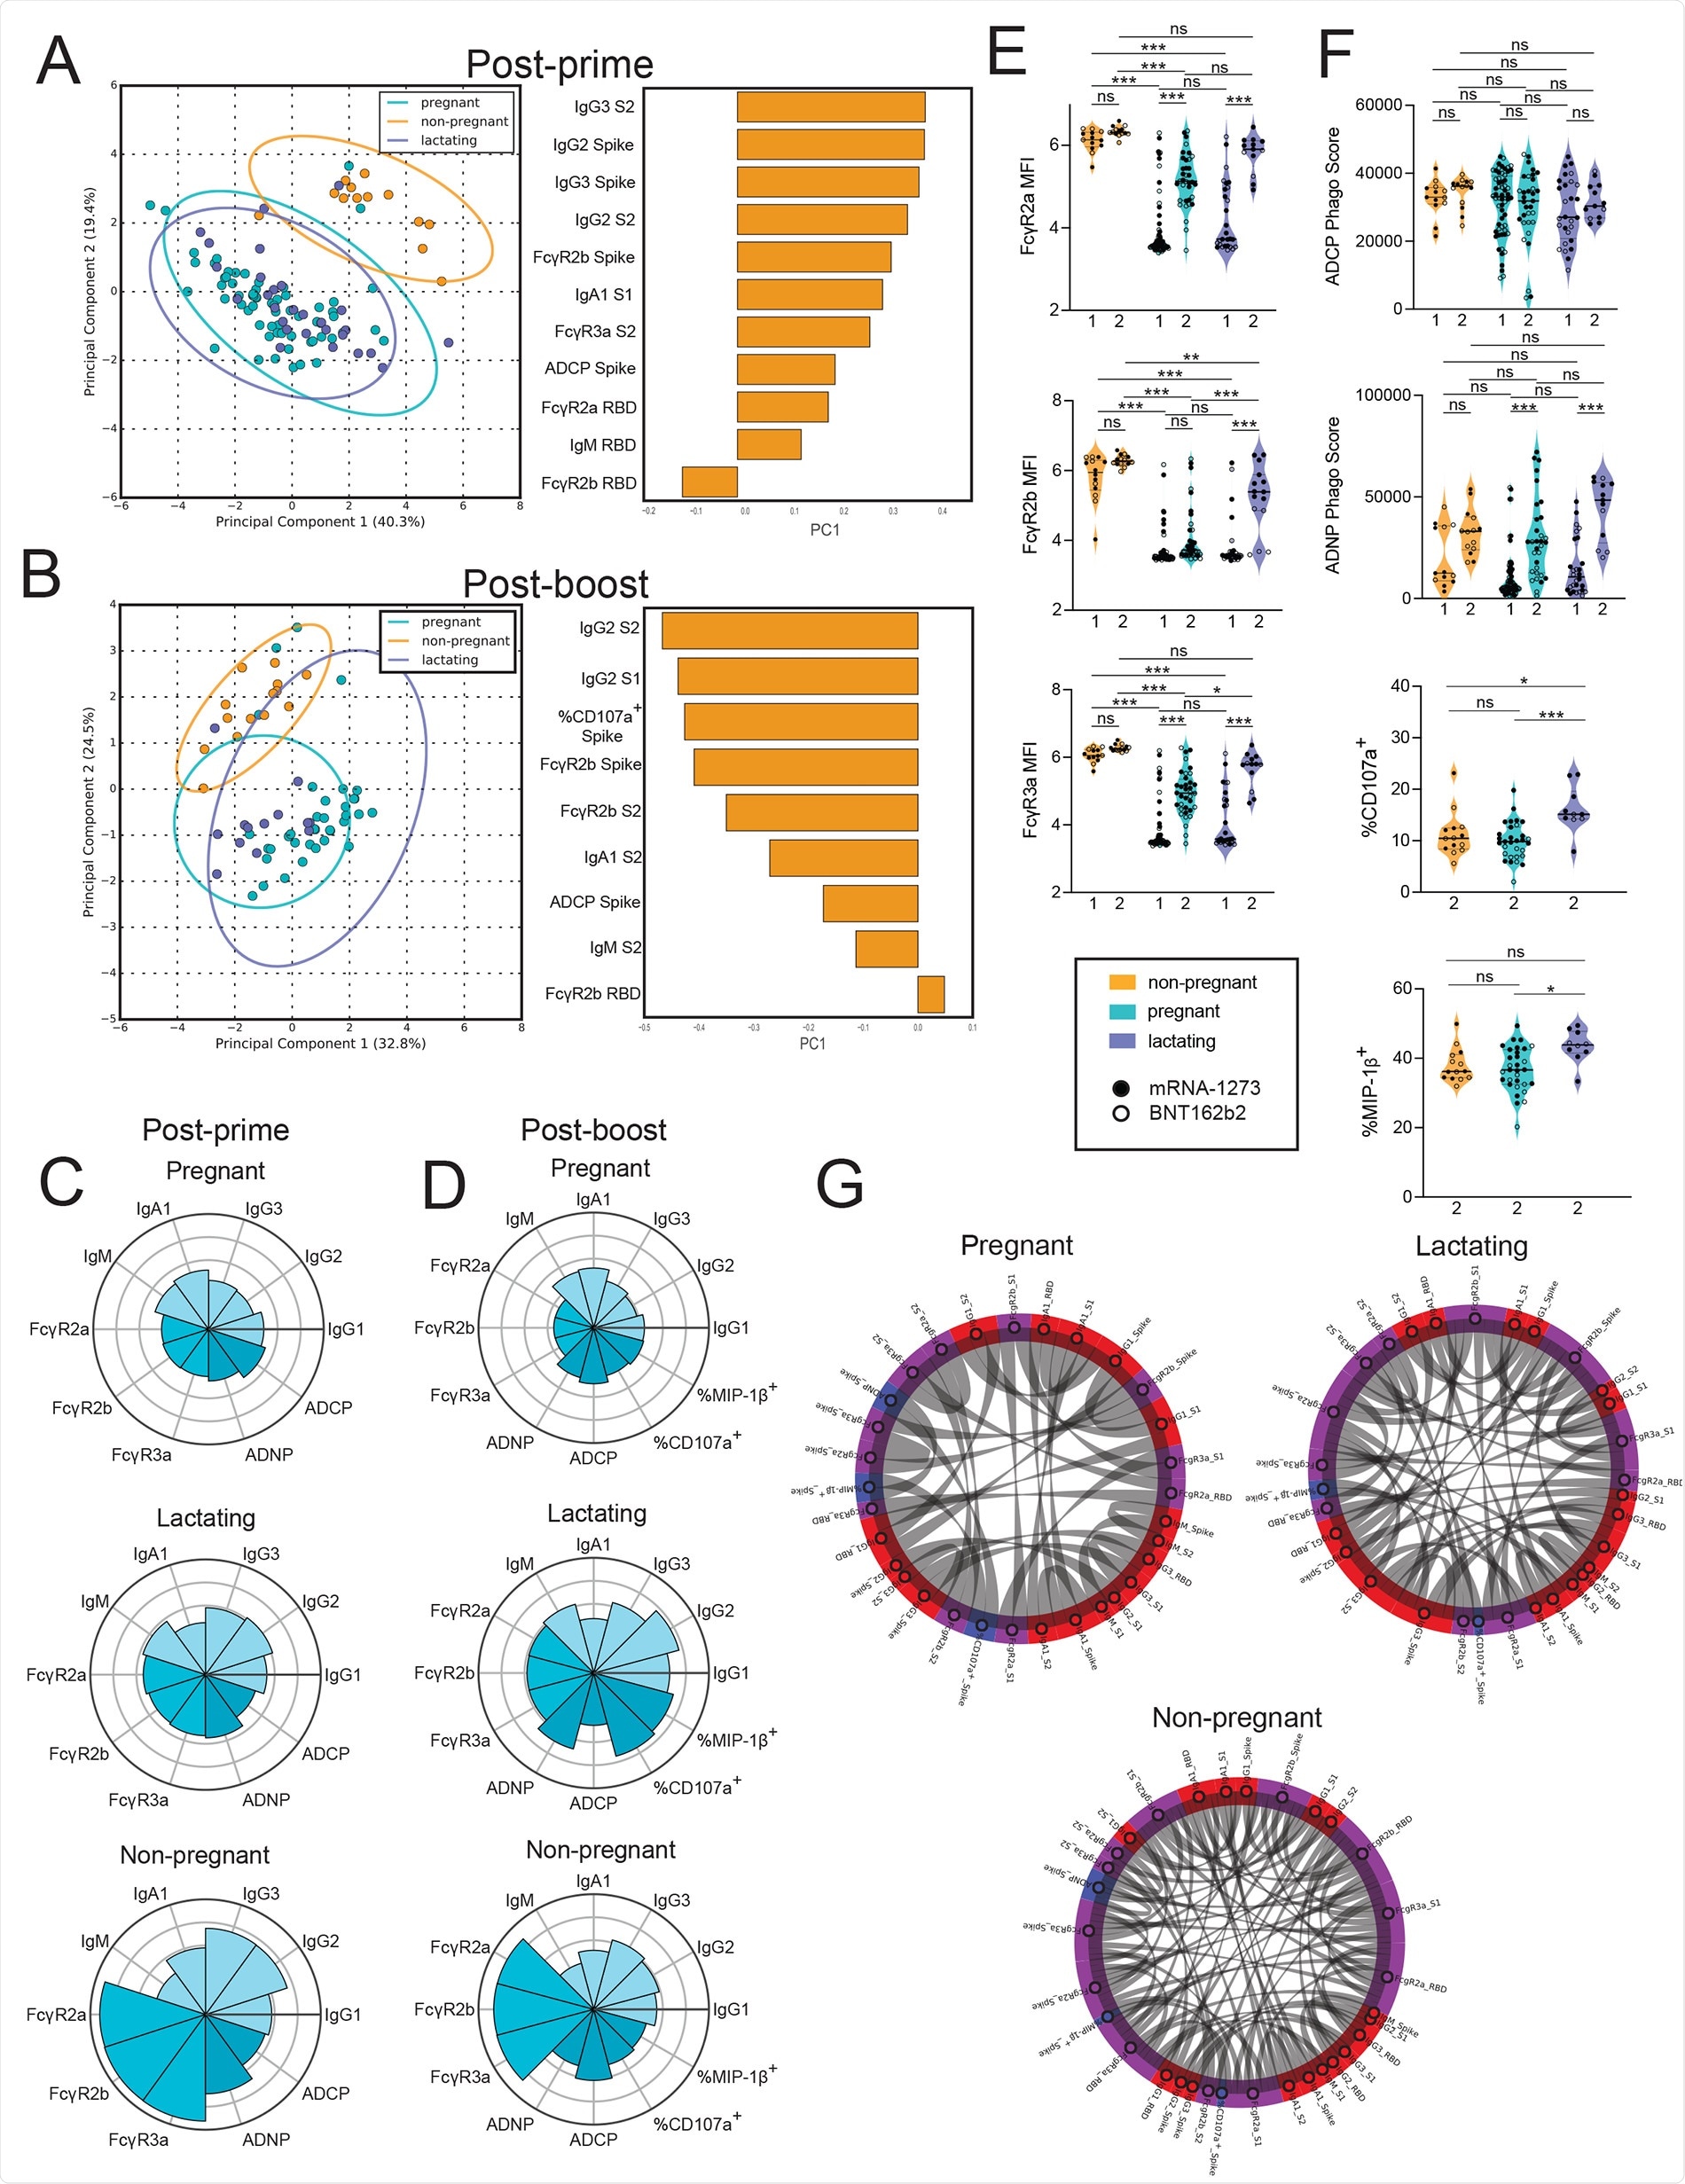 Vaccination induces enhanced FcR-binding in non-pregnant women.A and B. A principal component analysis (PCA) was built using LASSO-selected antibody features at 3 to 4 weeks post prime vaccination (A) or 2 to 5.5 weeks post boost vaccination (B). The dot plots show the scores of each individual, with each dot representing an individual. The ellipses represent the 95% confidence interval for each group. The bar plots show the loadings of the LASSO-selected features along principal component 1 (PC1). C and D. The polar plots show the mean percentile rank for each feature for post-prime (C) and post-boost (D) samples. Features were ranked separately for each time point. E. The violin plots show the FcγR-binding for non-pregnant, pregnant, and lactating women at post-prime (1) (non-pregnant n = 13, pregnant n = 64, lactating n = 28) and post-boost (2) (non-pregnant n = 14, pregnant n = 36, lactating n = 13). The filled dots show the titer for women who received mRNA-1273, and outlines show the titer for women who received BNT162b2. MFI, median fluorescence intensity. Data are presented as median ± IQR. Significance was determined by a one-way ANOVA followed by posthoc Tukey’s multiple comparison test. P-values were then corrected for multiple comparisons using the Bejamini-Hochberg procedure, * p <0.05, ** p < 0.01,*** p < 0.001, **** p < 0.0001, ns, not significant. F. The violin plots show the antibody functions for non-pregnant, pregnant, and lactating women at post-prime (1) (non-pregnant n = 13, pregnant n = 64, lactating n = 28) and post-boost (2) (non-pregnant n = 14, pregnant n = 36, lactating n = 13). The filled dots show the titer for women who received mRNA-1273, and outlines show the titer for women who received BNT162b2 vaccine. Phago indicates phagocytosis. Data are presented as median ± IQR. Significance was determined by a one-way ANOVA followed by posthoc Tukey’s multiple comparison test. P-values were then corrected for multiple comparisons using the Bejamini-Hochberg procedure, * p <0.05, ** p < 0.01,*** p < 0.001, **** p < 0.0001, ns, not significant. G. The chord diagrams connect the features that have a spearman correlation > 0.75 and Bonferroni-corrected p-value < 0.05 for non-pregnant, pregnant, and lactating women. Red indicates antibody isotype, purple indicates FcR-binding and blue indicates antibody function.